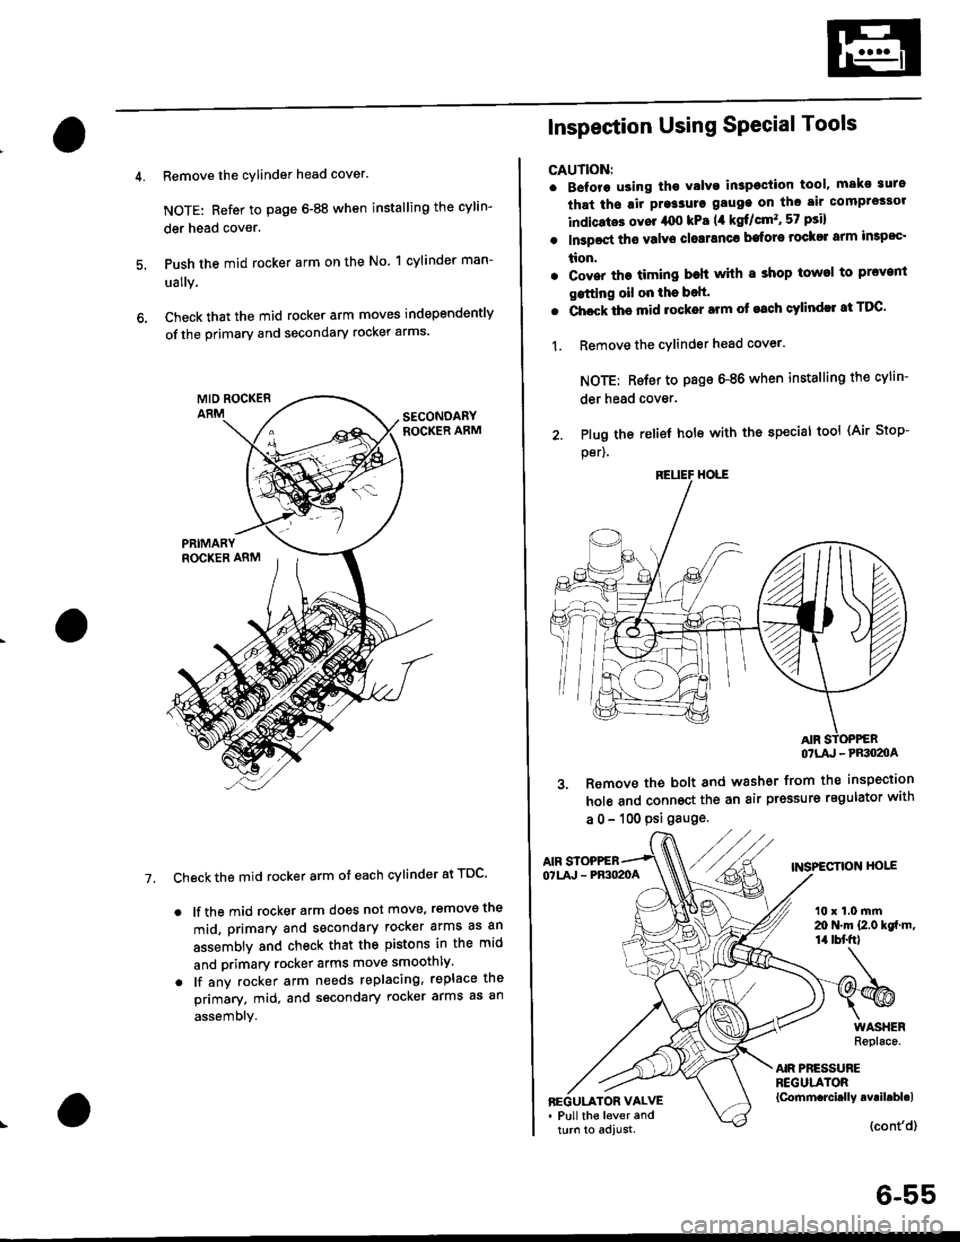 HONDA CIVIC 1998 6.G Service Manual Remove the cylinder head cover.
NOTE: Refer to page 6-88 when installing the cylin-
der head cover.
Push the mid rocker arm on the No. 1 cylinder man-
ually.
Check that the mid rocker arm moves indepe